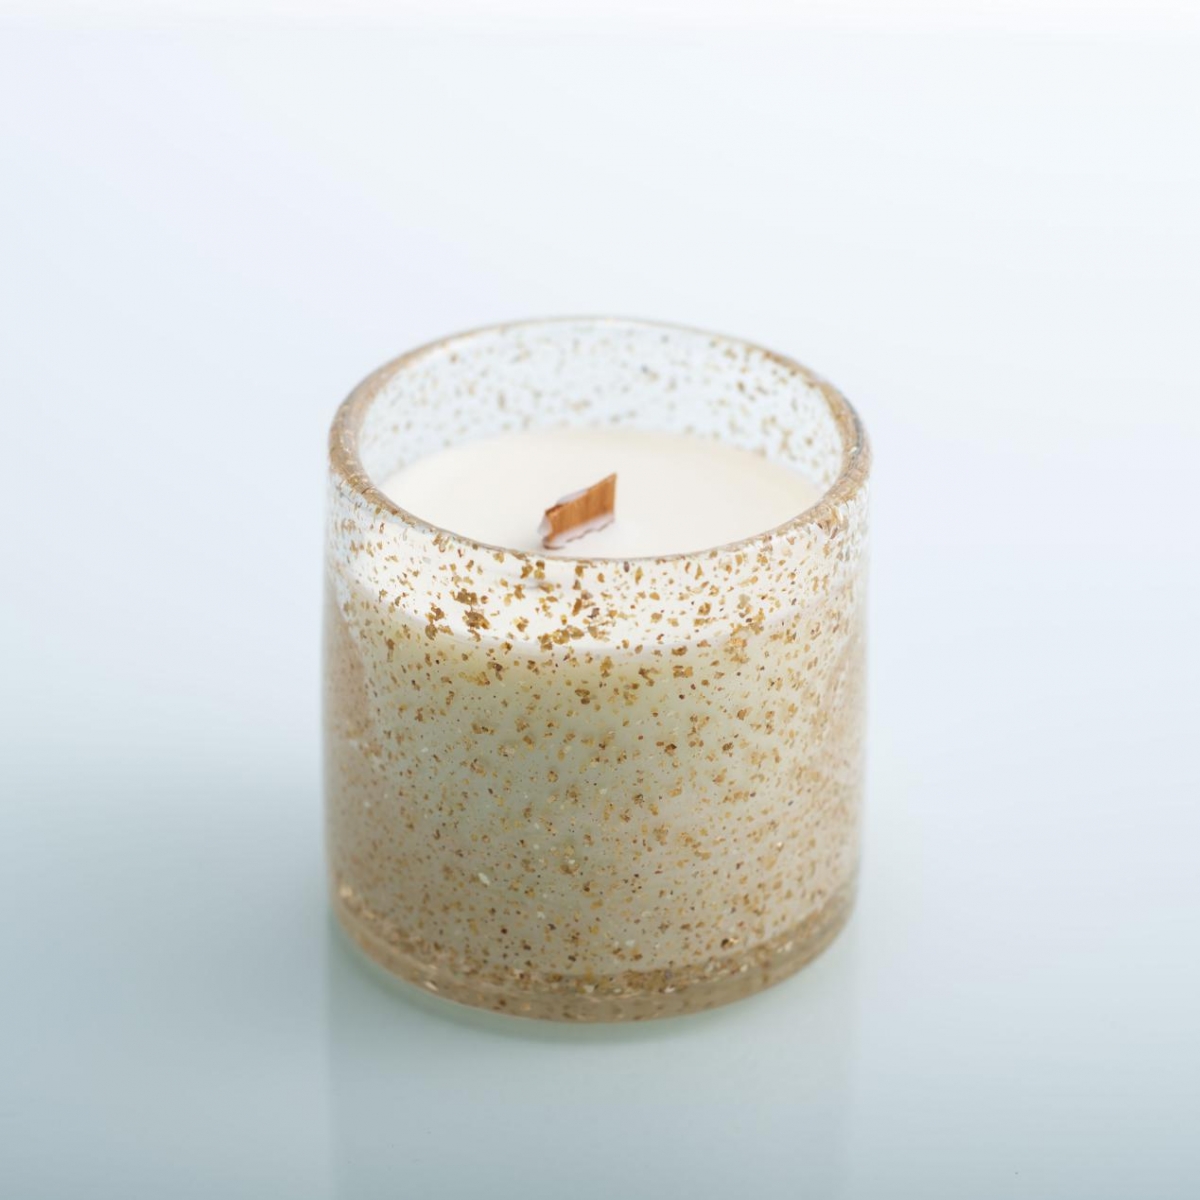 Luxury Gypsophila Glass Jar Candles ：Creed Silver Mountain Water ,Beeswax Scented Candles ,Wooden Wick Candles ,China Factory , Price-HOWCANDLE-Candles,Scented Candles,Aromatherapy Candles,Soy Candles,Vegan Candles,Jar Candles,Pillar Candles,Candle Gift Sets,Essential Oils,Reed Diffuser,Candle Holder,